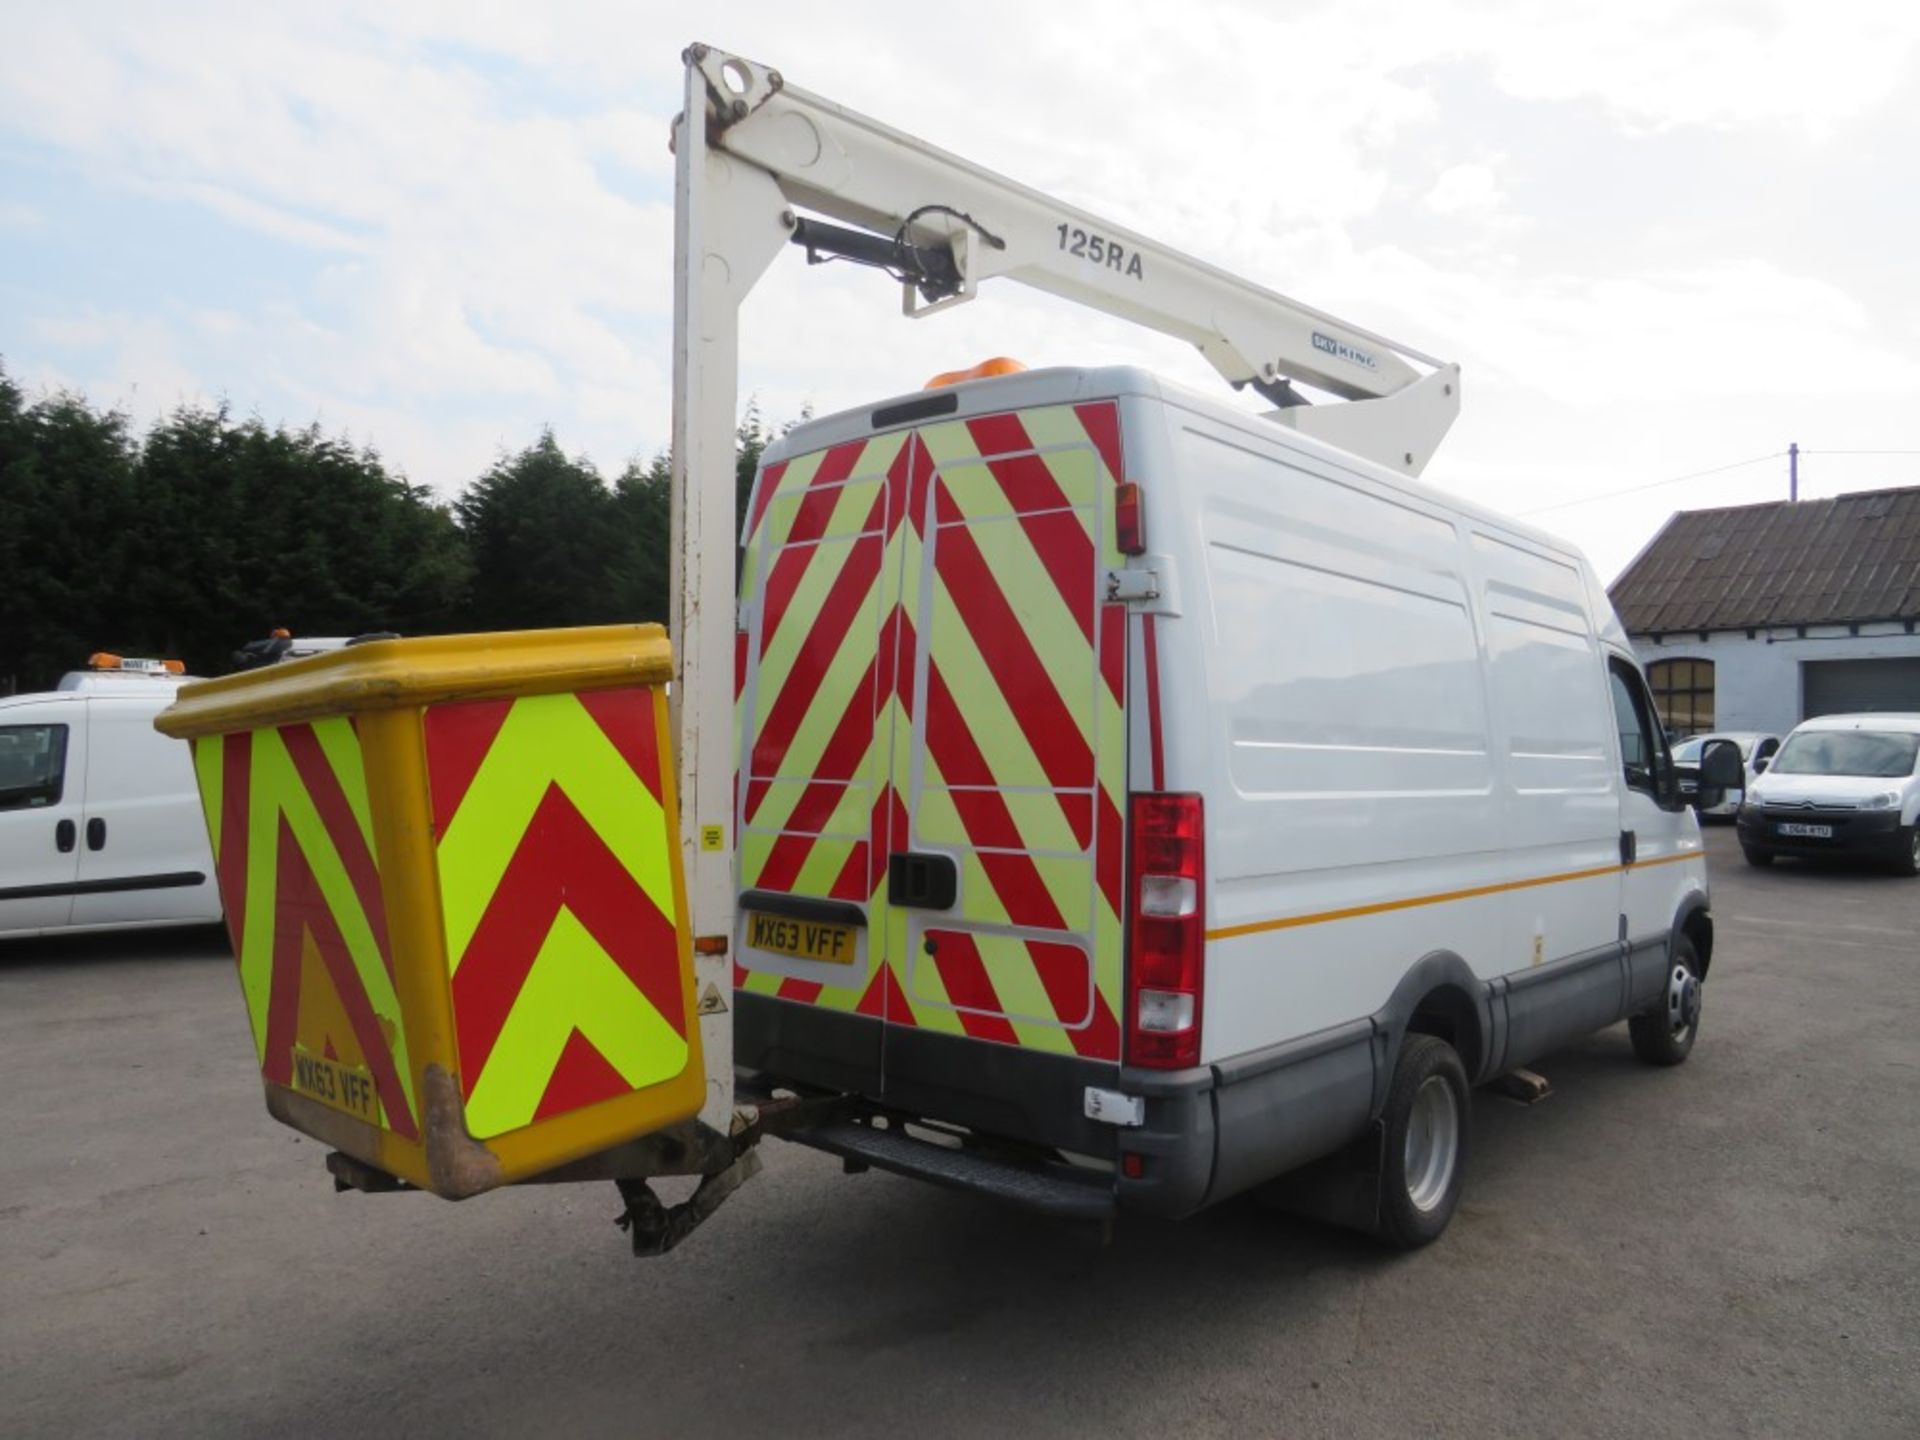 63 reg IVECO DAILY 50C15 CHERRY PICKER, 1ST REG 09/13, TEST 01/21, 72705M WARRANTED, V5 HERE, 3 - Image 4 of 6